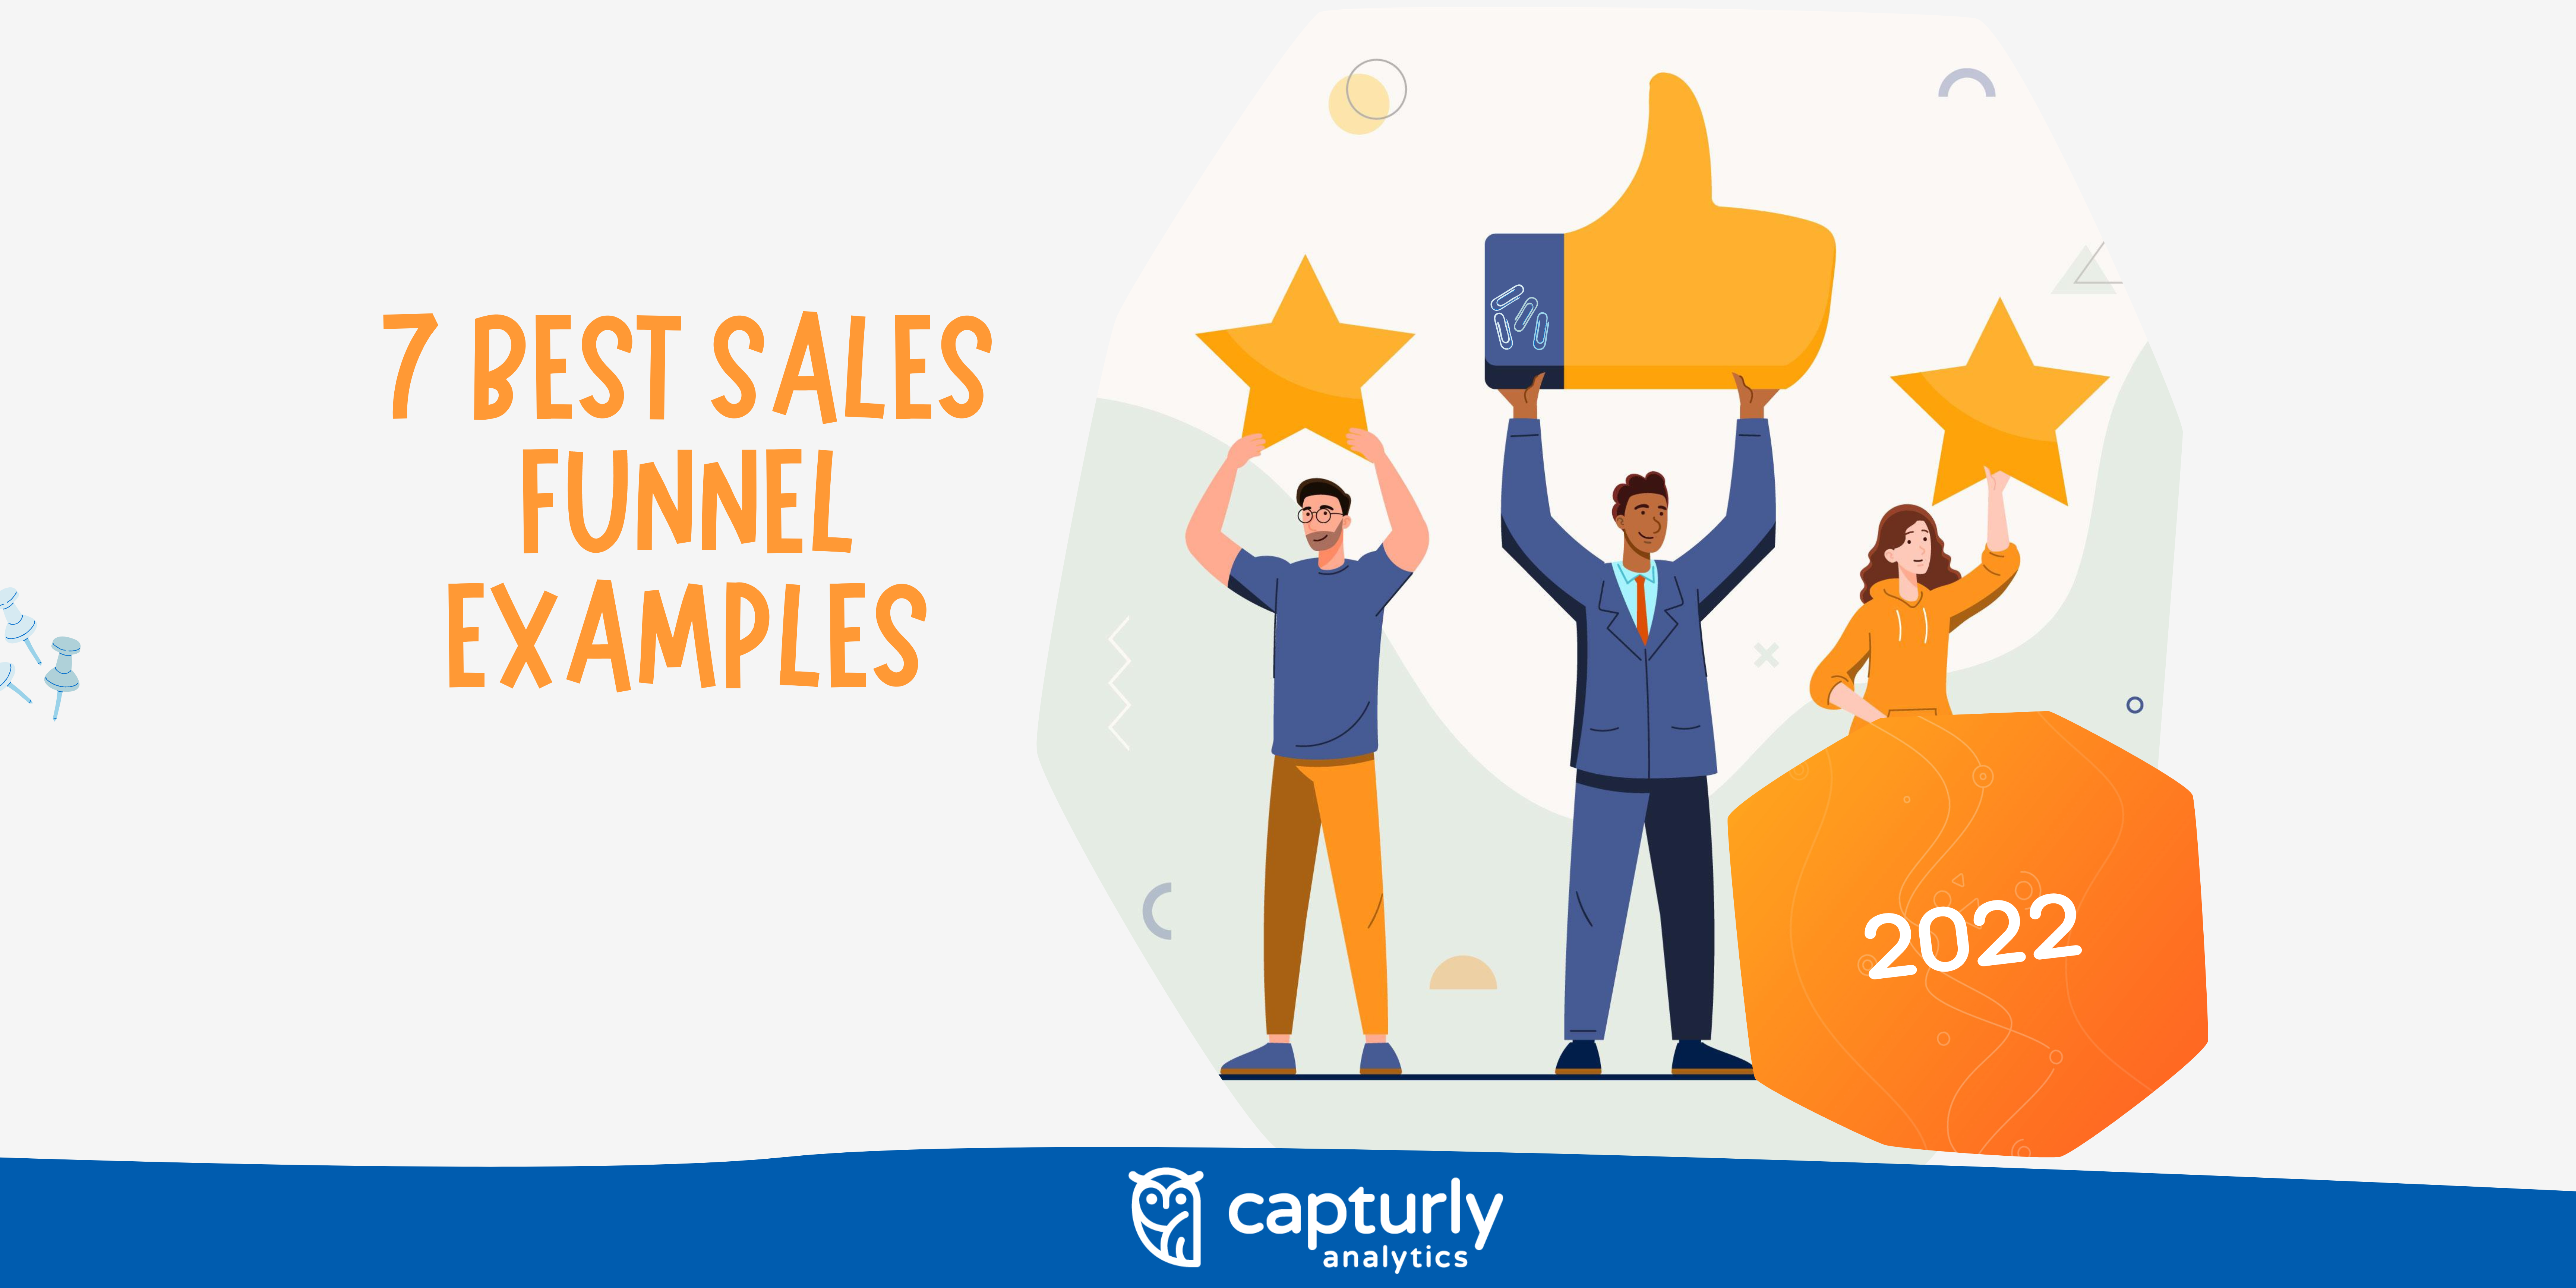 7 Best Sales Funnel Examples in 2022